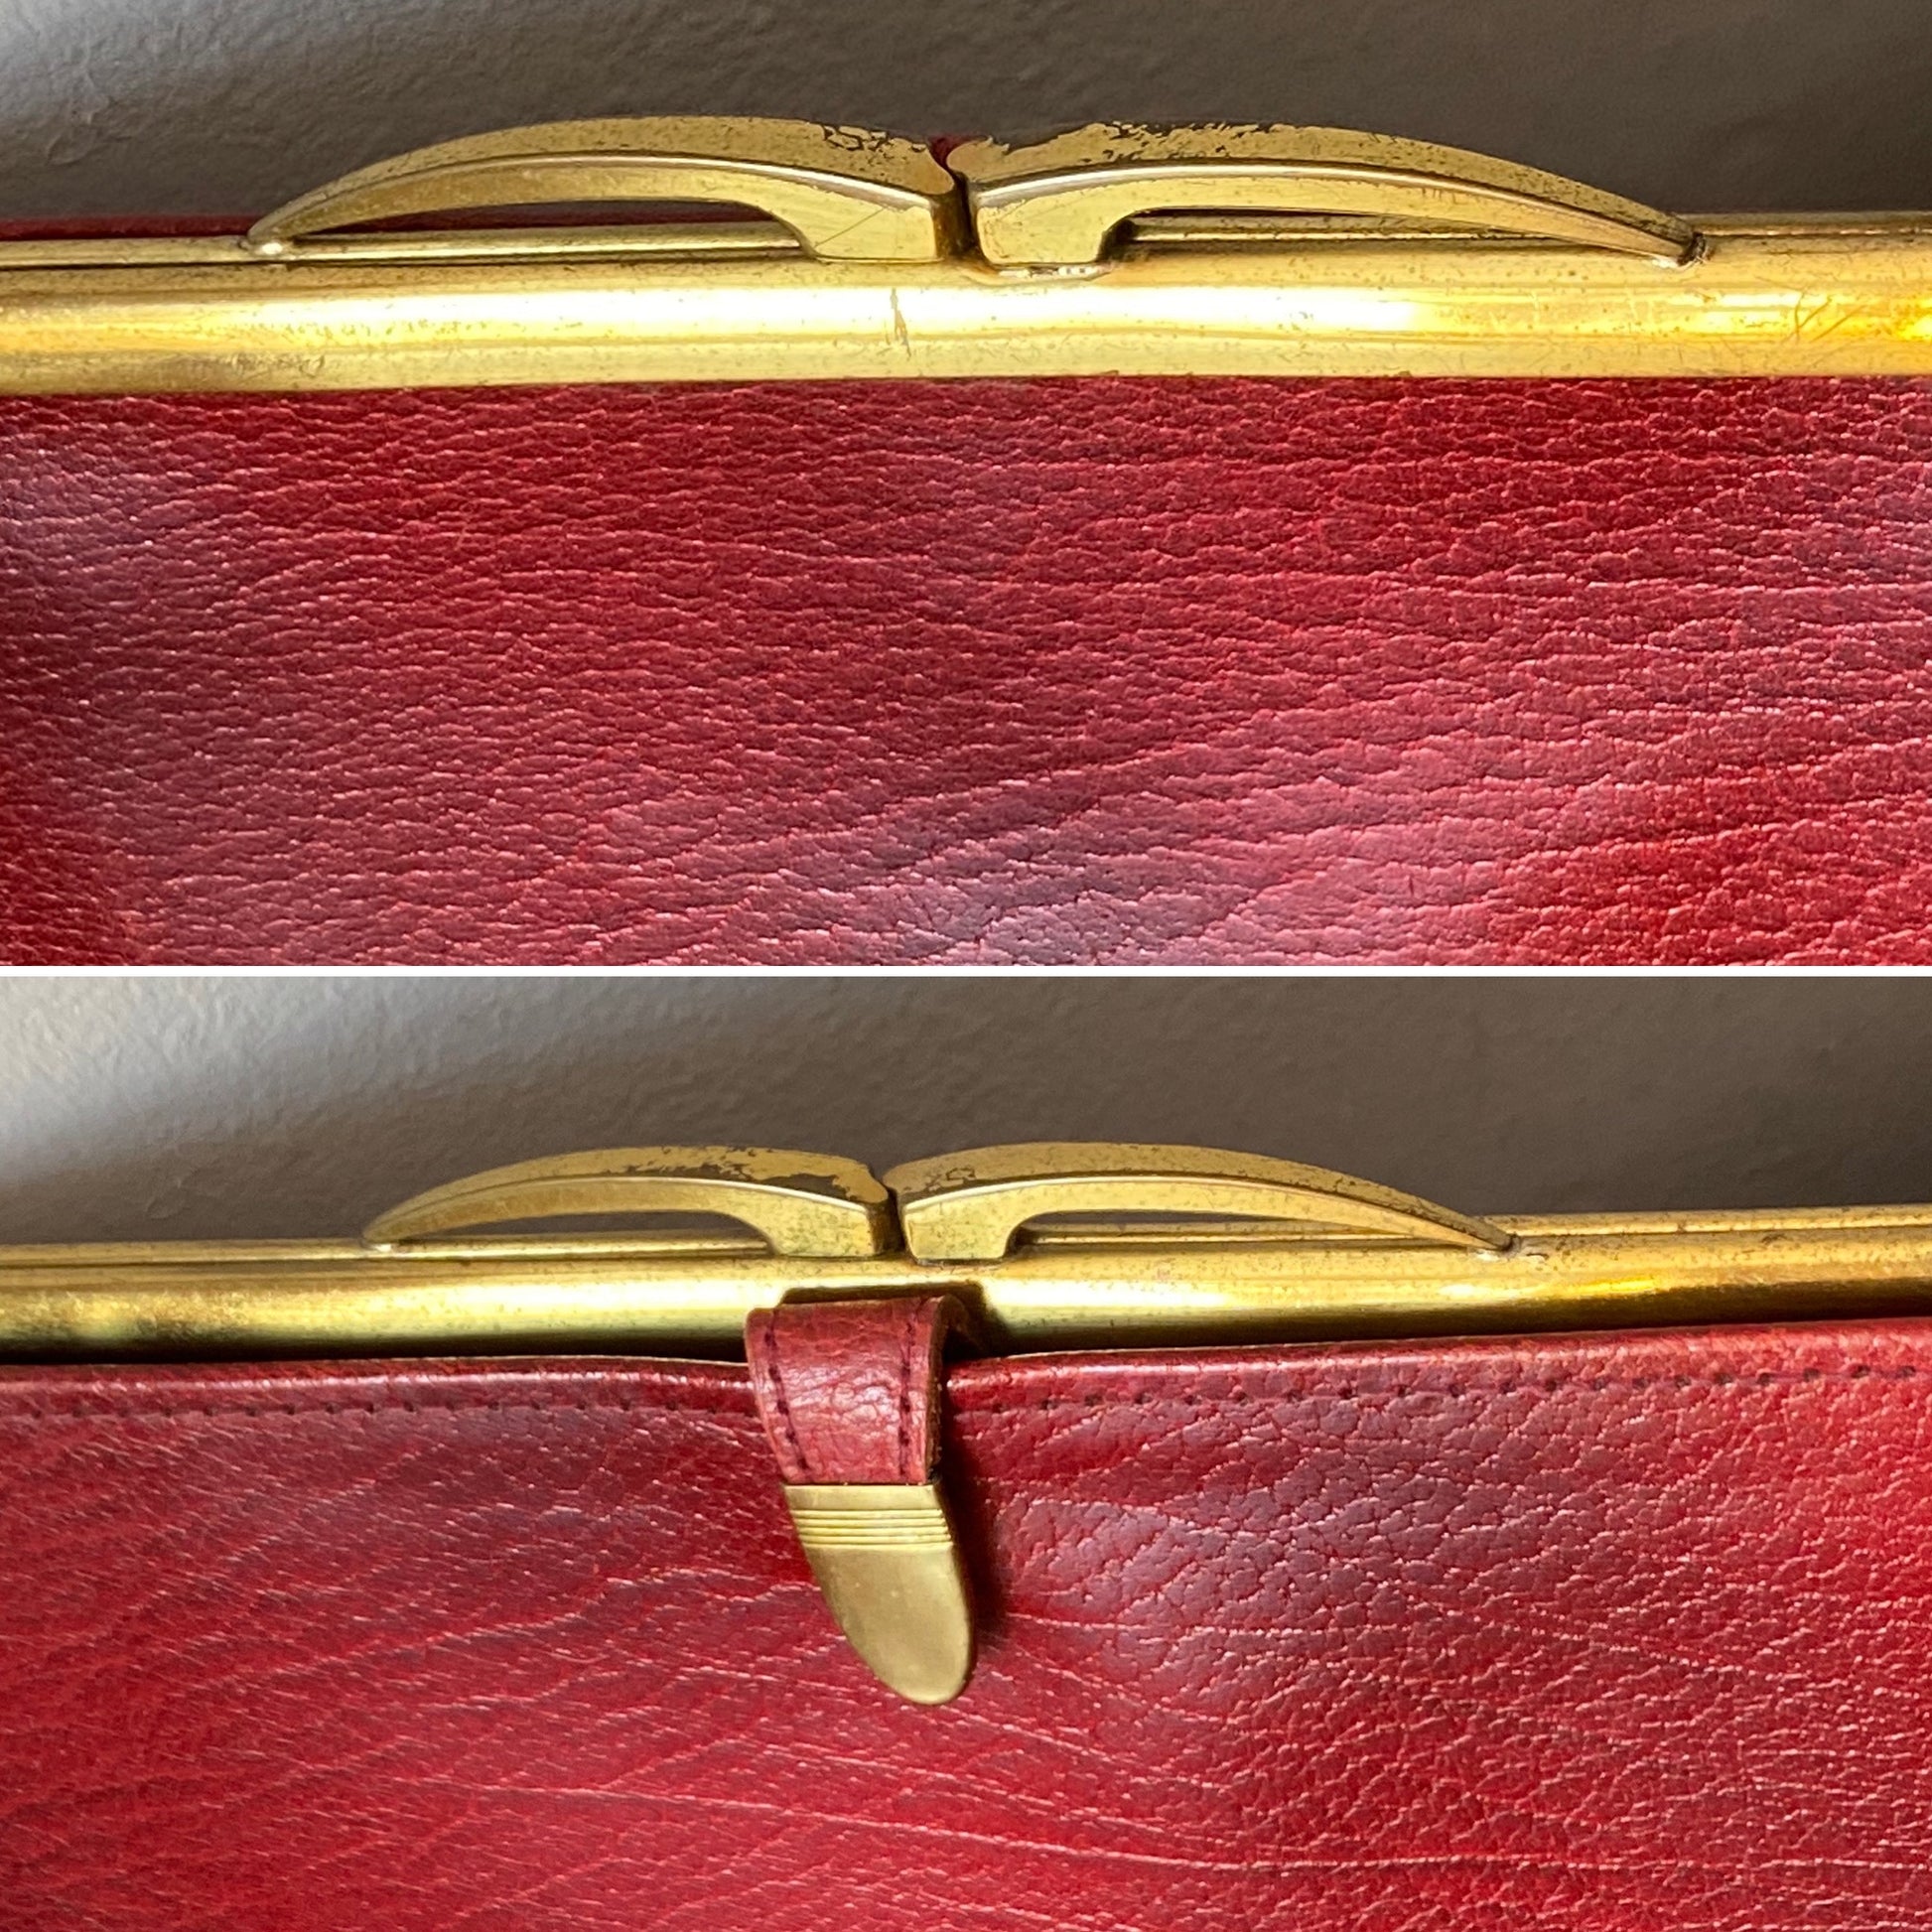 Vintage dark red leather purse with a kiss lock closure